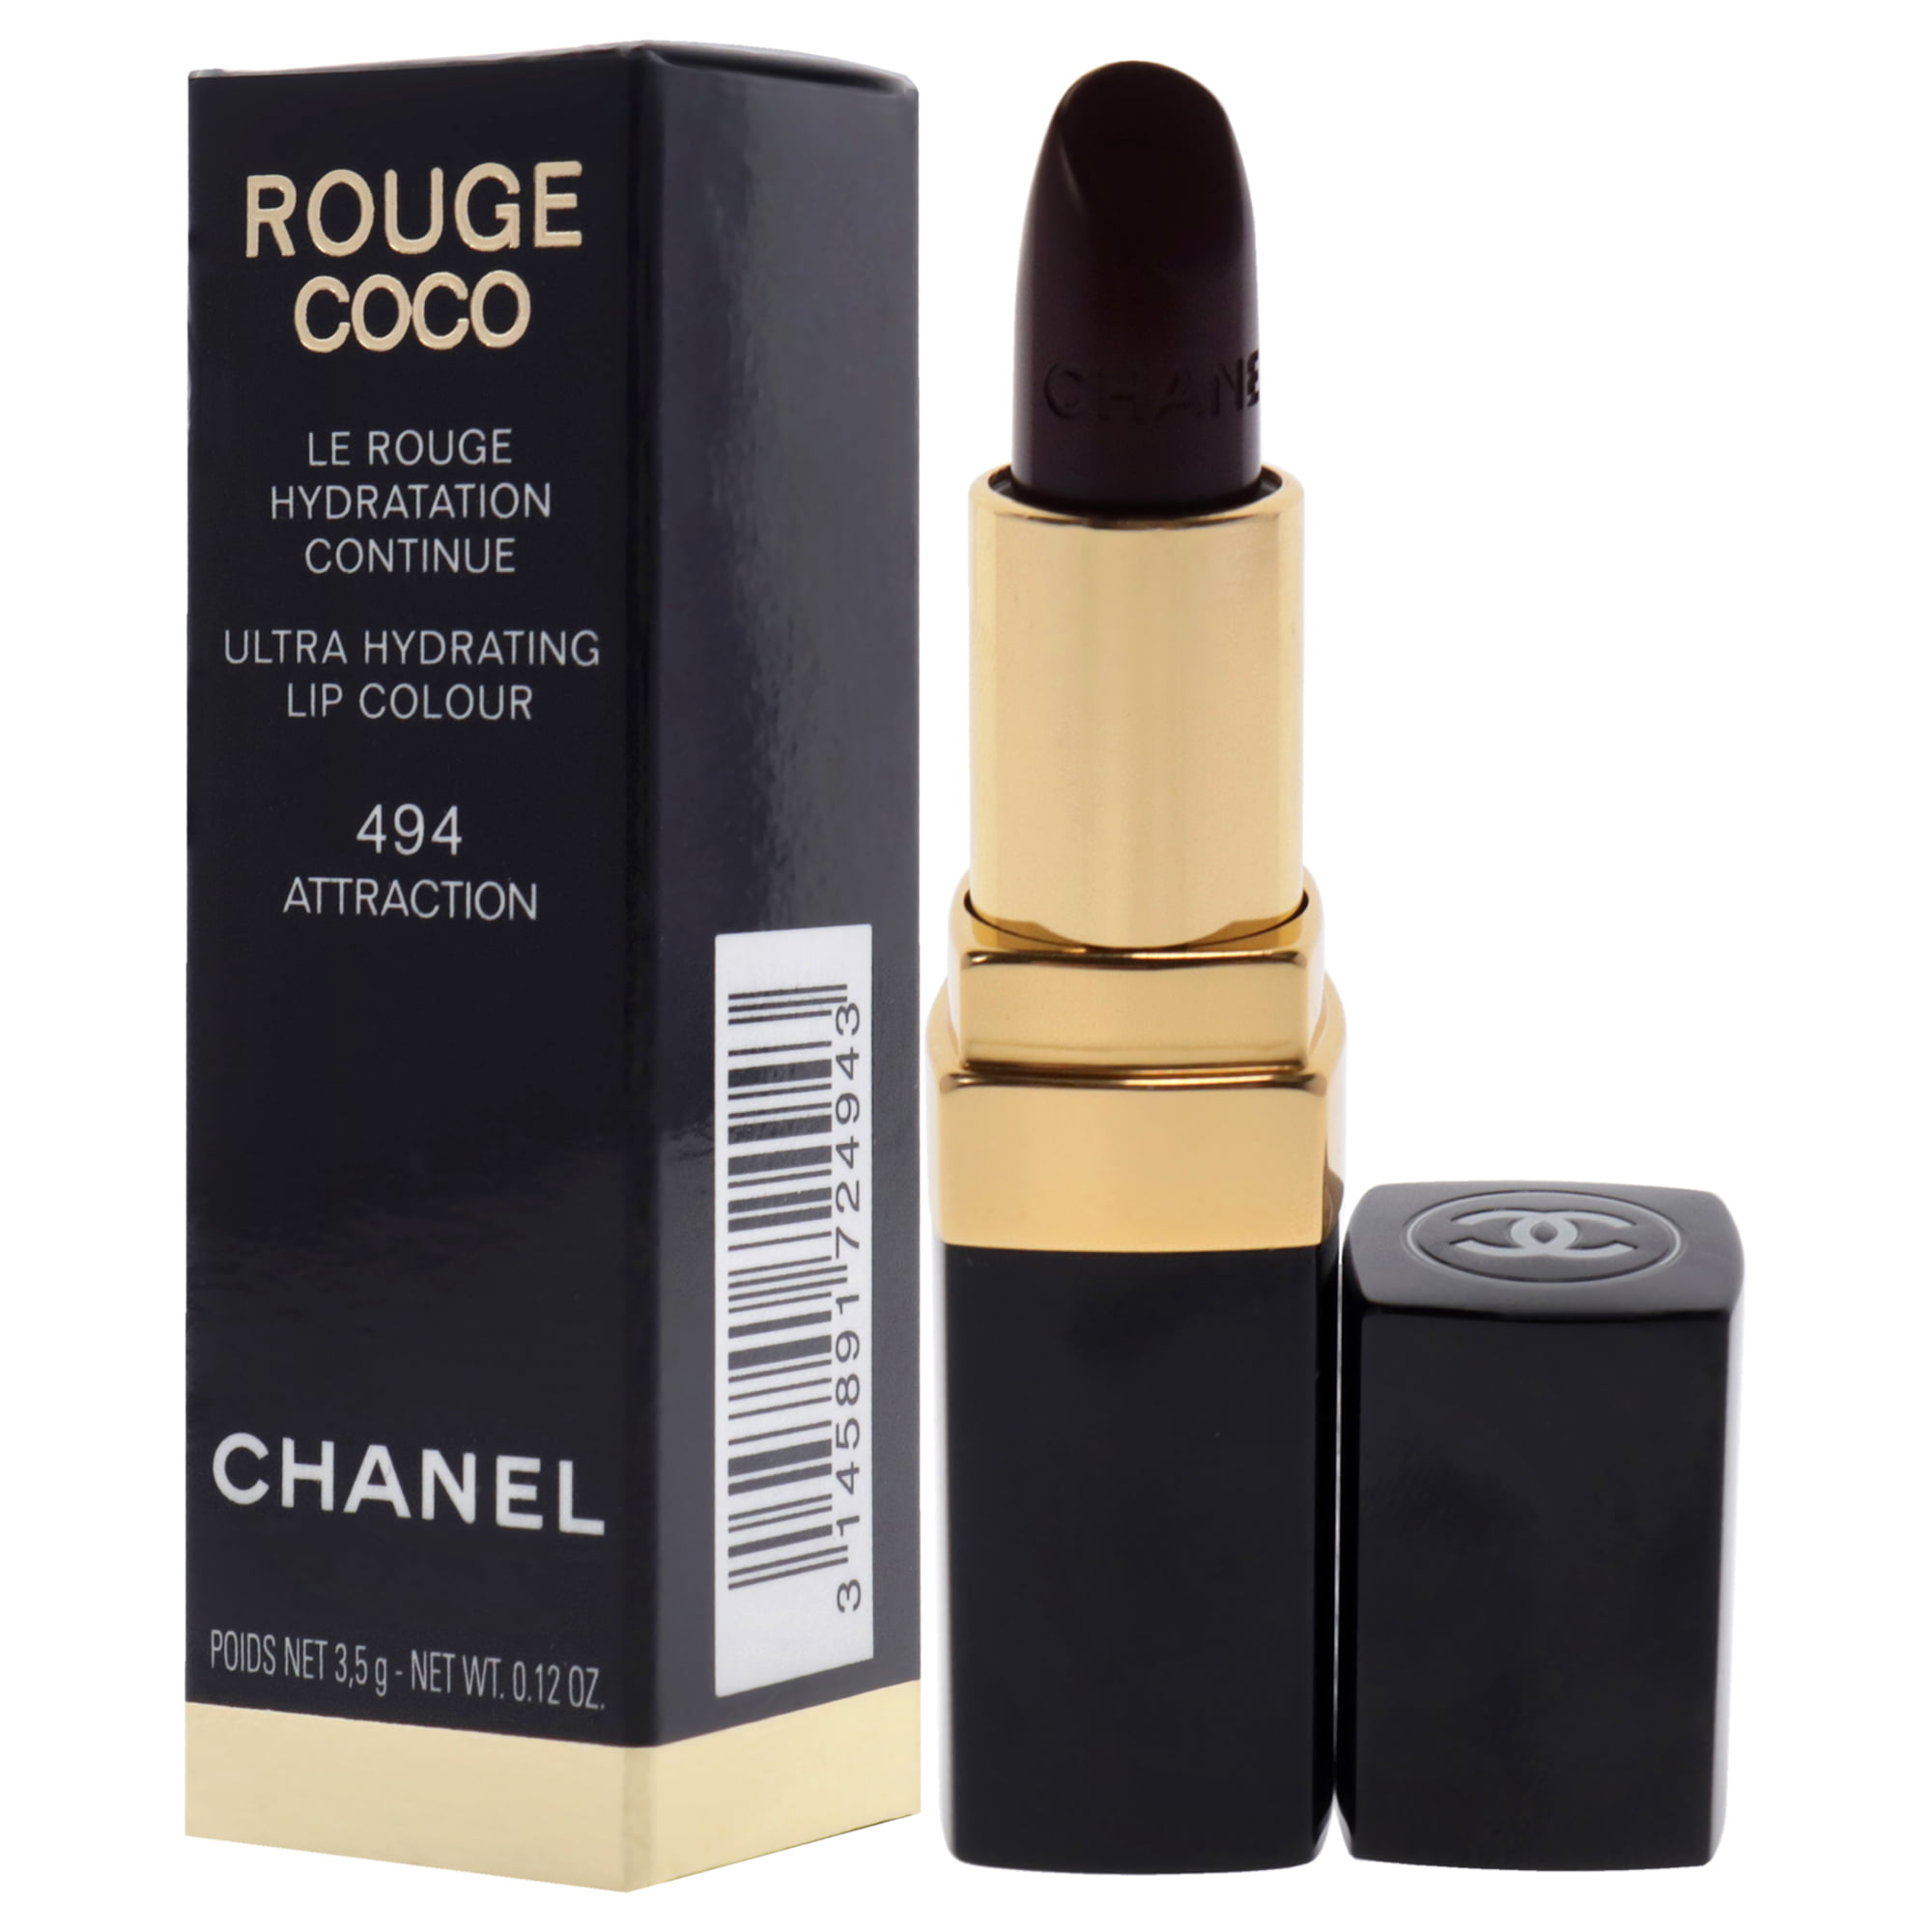 Chanel Rouge Coco Ultra Hydrating Lip Colour - 494 Attraction 0.12